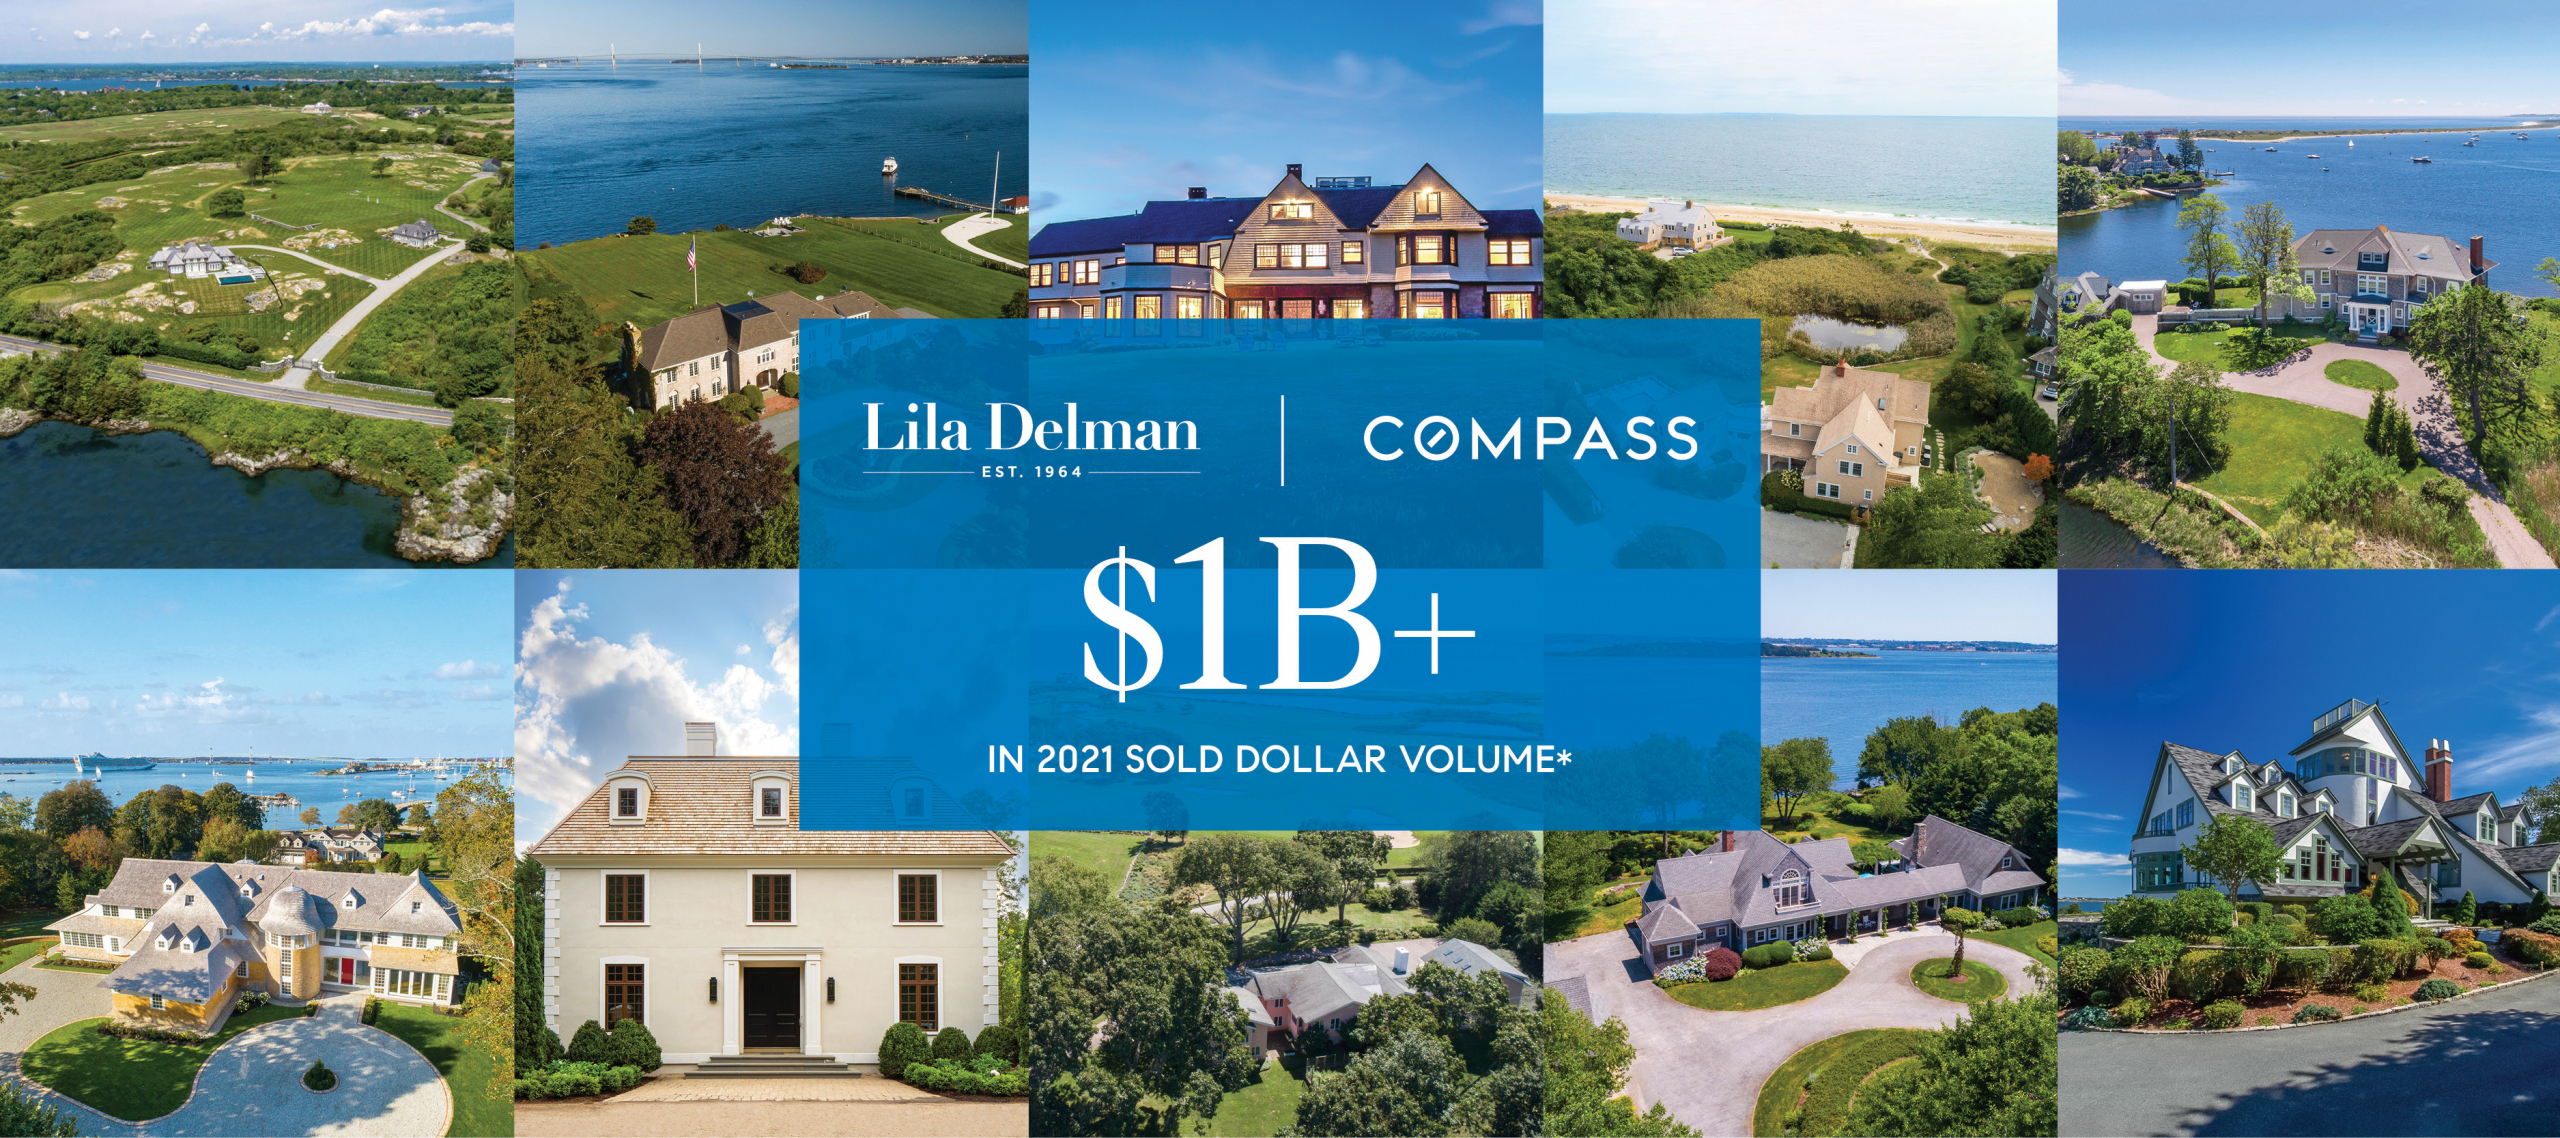 2021 MARKED A HISTORIC YEAR FOR LILA DELMAN COMPASS WITH OVER $1B IN SALES VOLUME